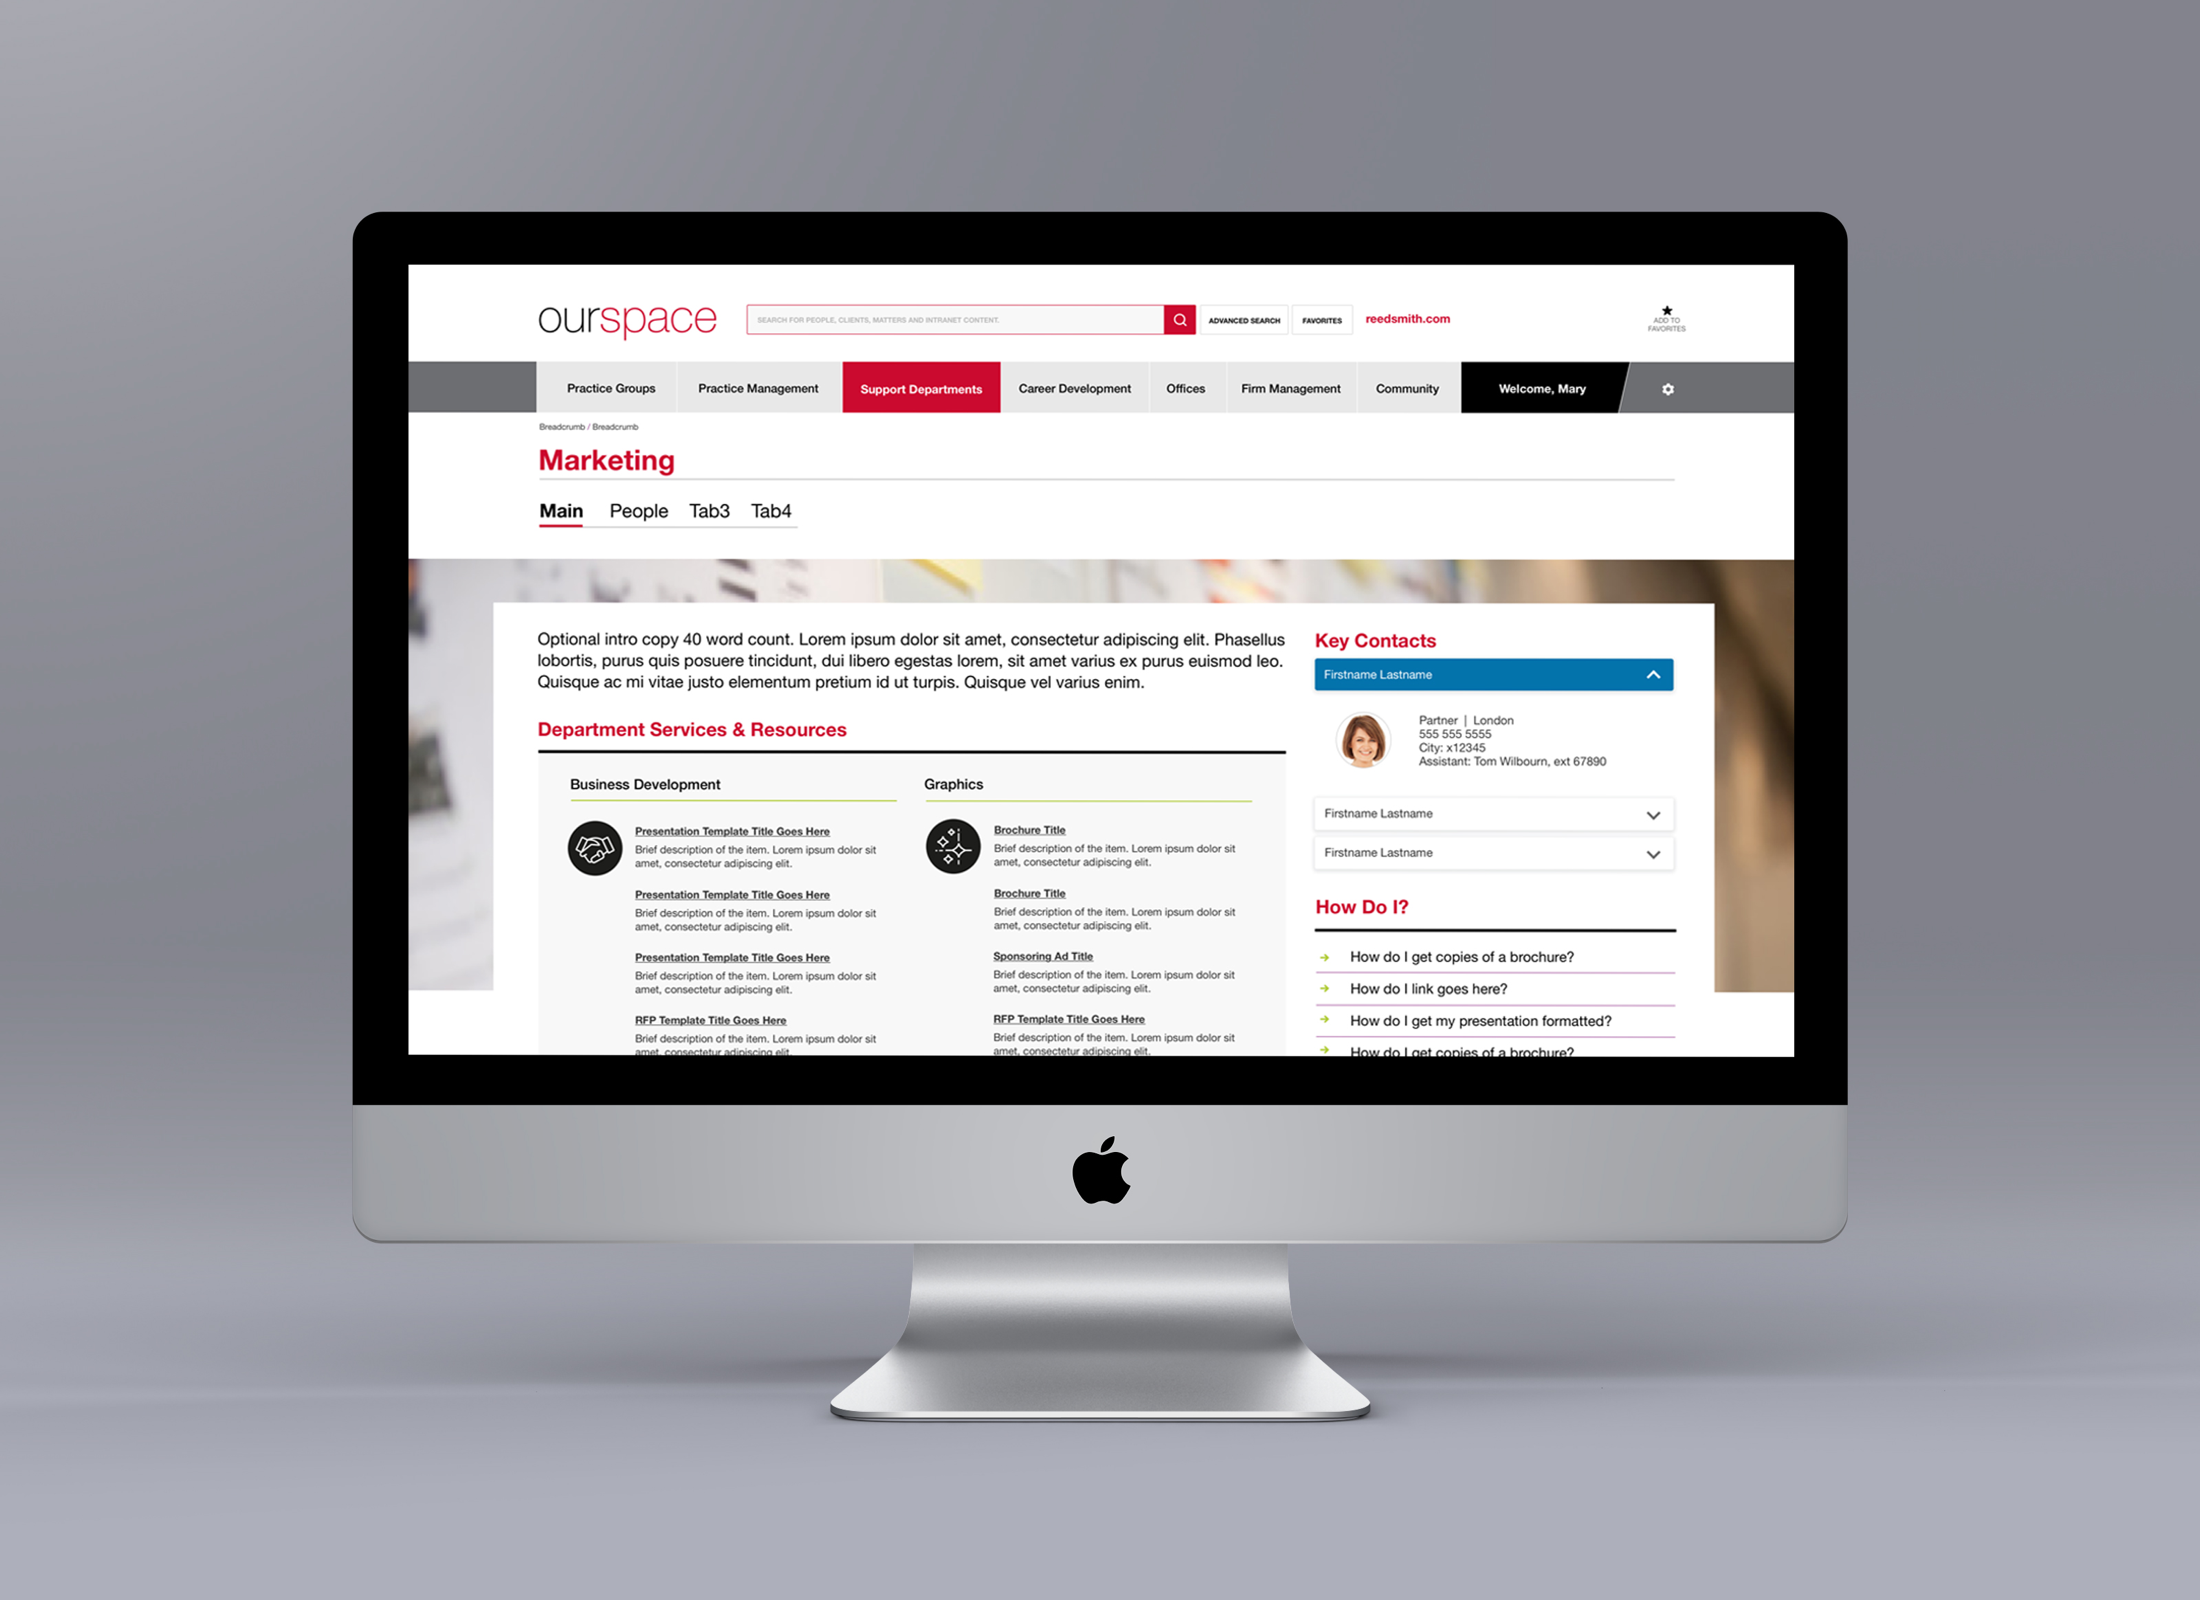 Law Firm Intranet Example